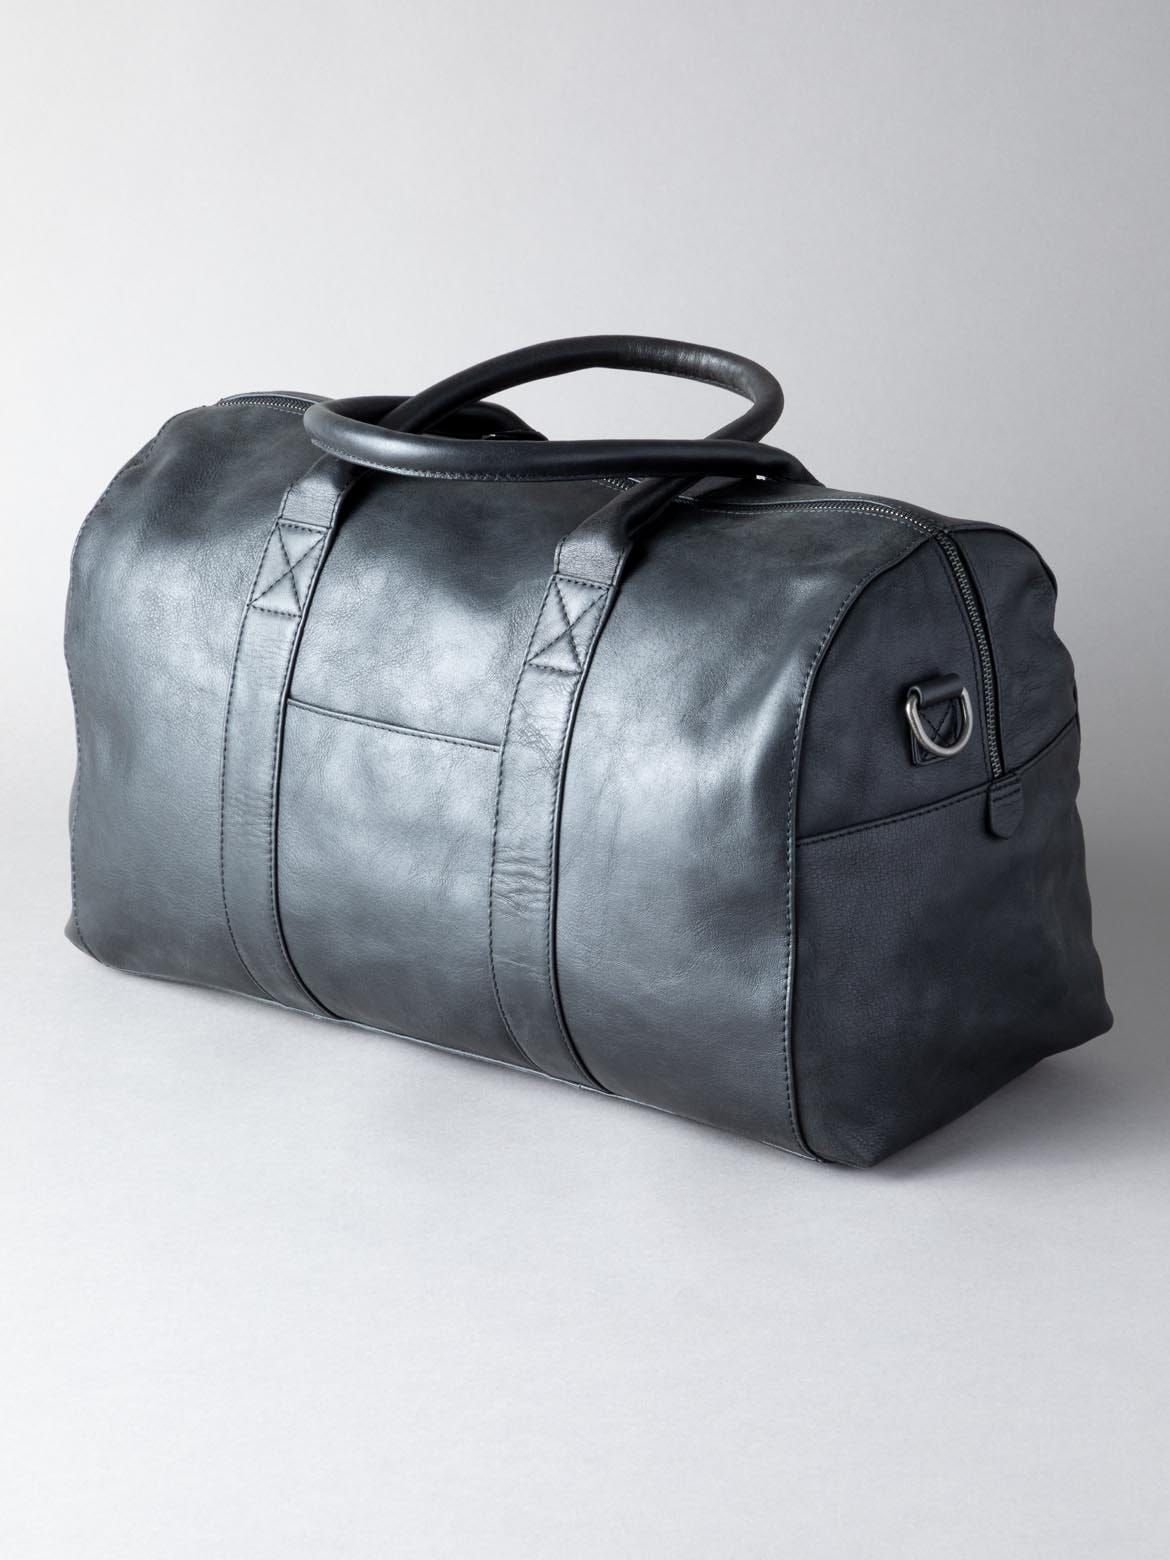 Explore in style with the Scarsdale Holdall in black. Crafted from premium natural leather, the holdall has been engineered for a rich, textured finish. With use it will develop a natural patina, so it will become even more uniquely yours over time � a mark of true quality. This leather holdall has been designed with comfort and durability at the forefront. The grab handles are padded so the bag can be carried with ease. The shoulder strap is fully adjustable and detachable with large, strong, clasp fittings to withstand the demands of everyday life. It is also lined throughout in a satin fabric.